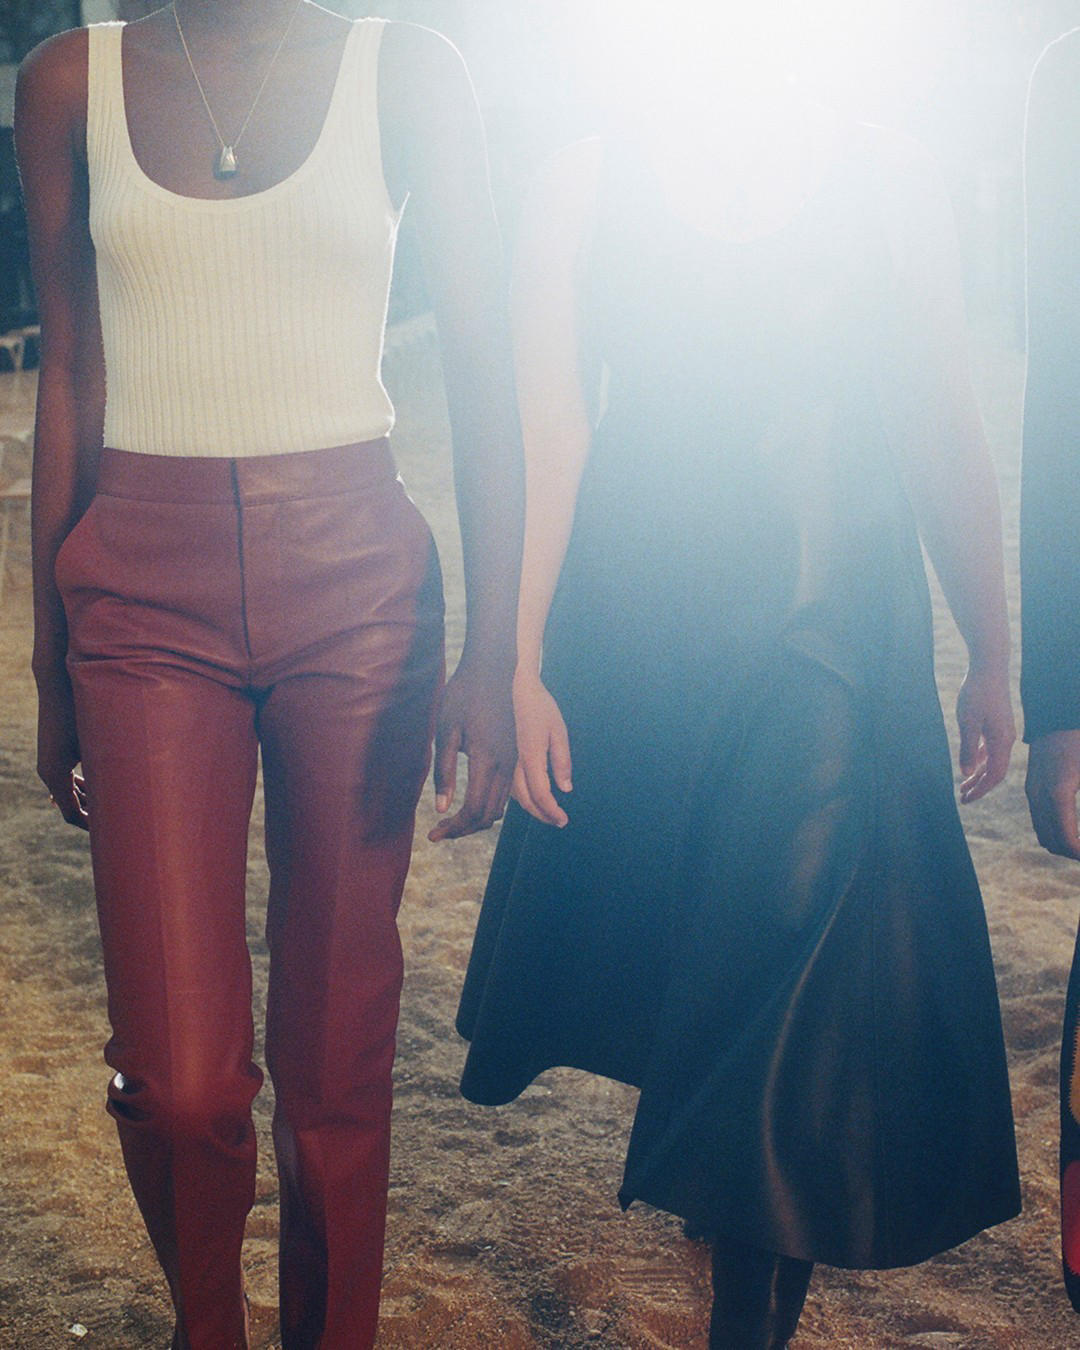 Chloé - Bold all-over leather looks from the Autumn-Winter 2022 collection are cut from lustrous hi